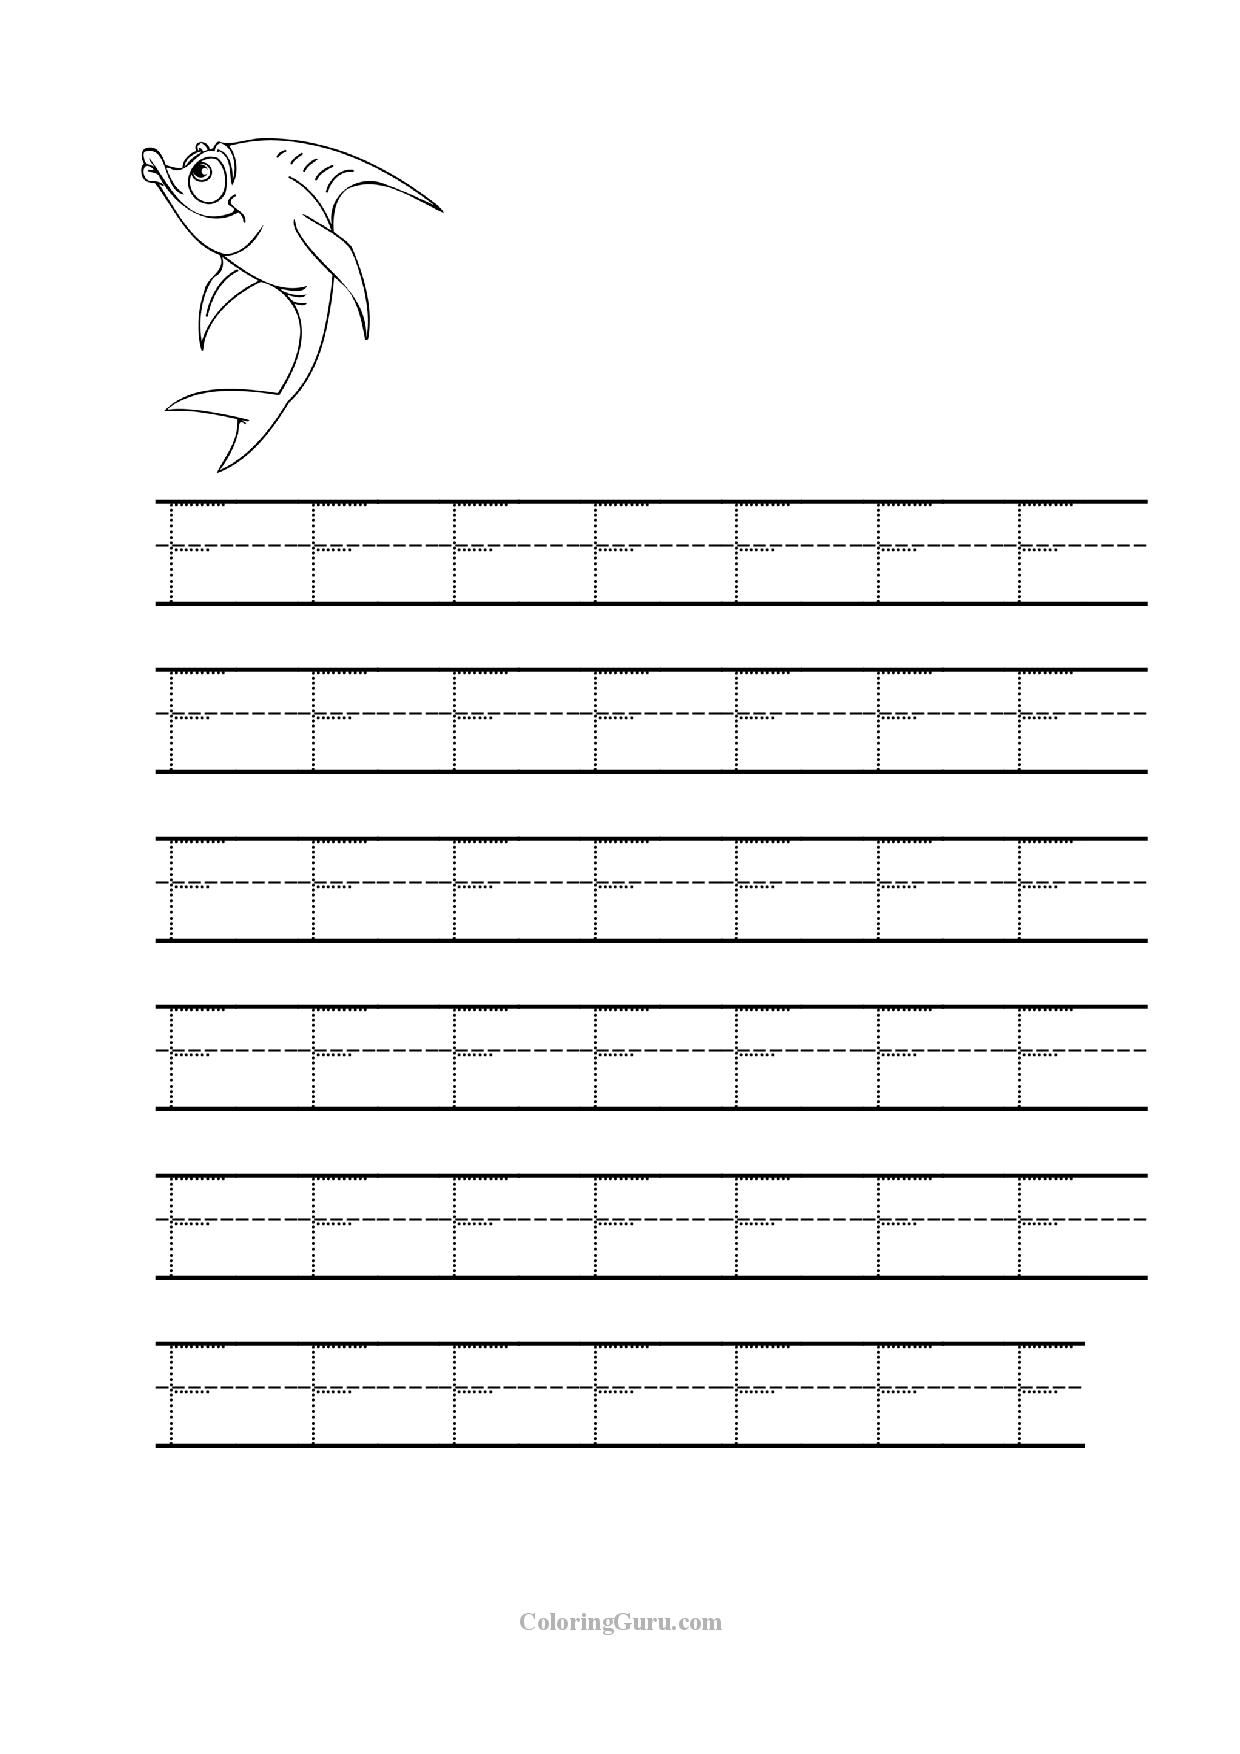 Free Printable Tracing Letter F Worksheets For Preschool with Letter F Worksheets Prek